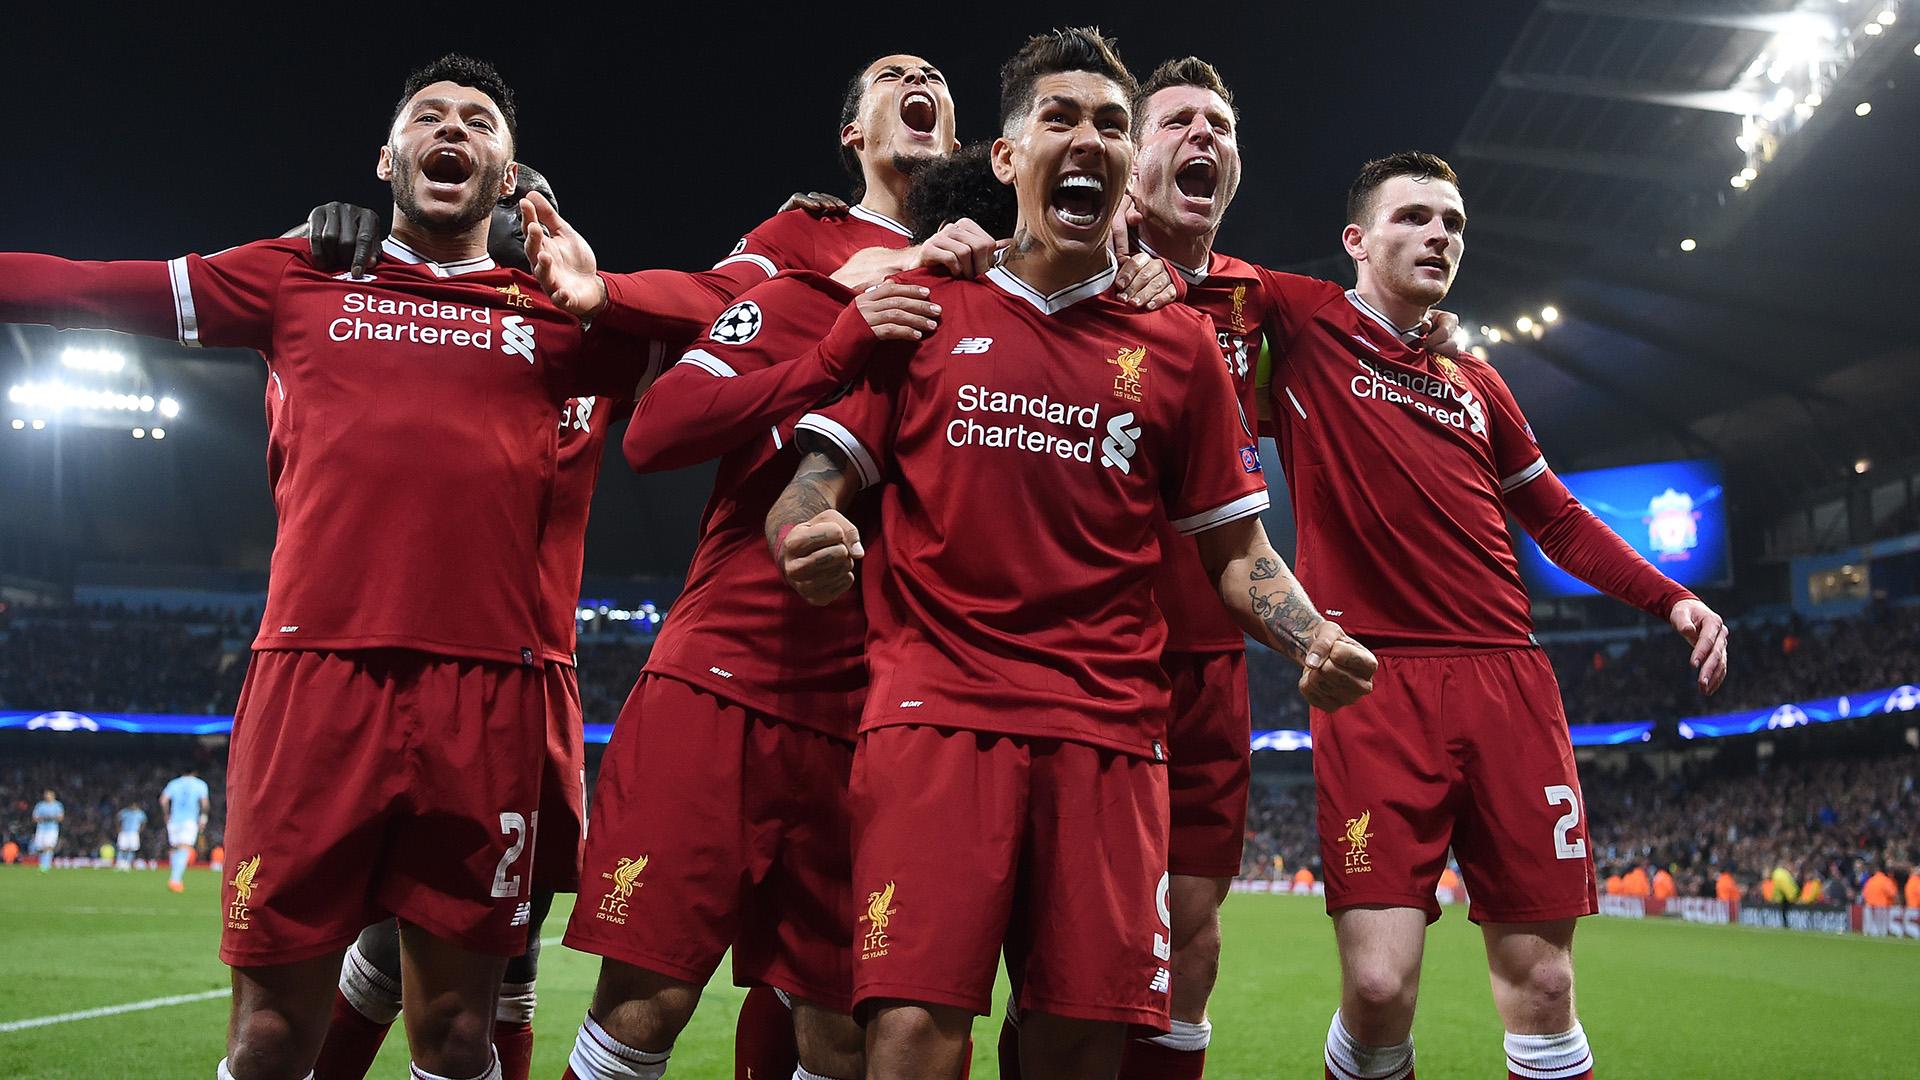 Liverpool are now favourites to win Champions League, says Stuart